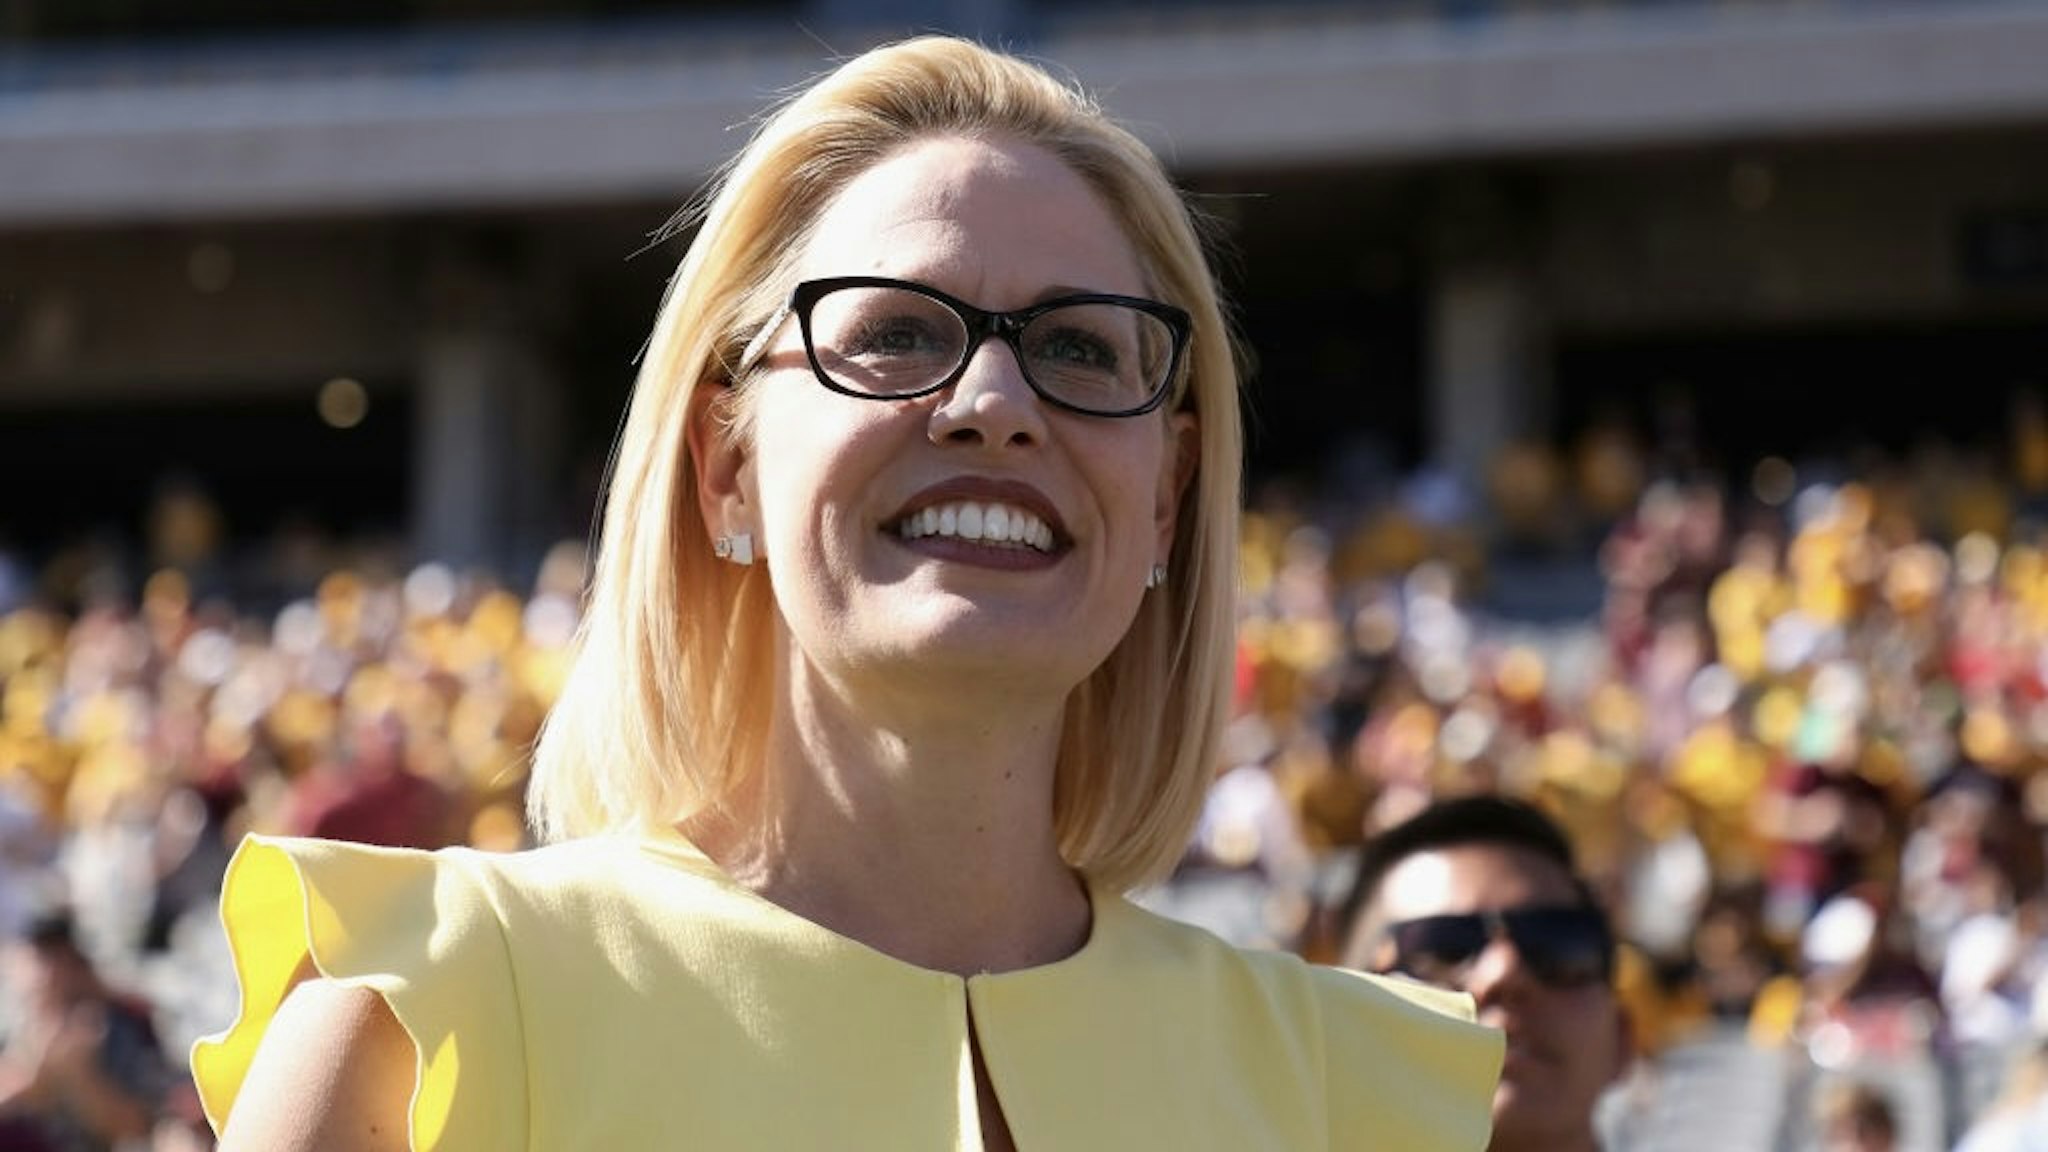 Arizona Senate Candidates Attend Arizona State Football Game TEMPE, AZ - NOVEMBER 03: Democrat U.S. Senate candidate Kyrsten Sinema participates in the pregame coin toss before the game between the Utah Utes and the Arizona State Sun Devils at Sun Devil Stadium on November 3, 2018 in Tempe, Arizona. Sinema is running against two-term congresswoman Martha McSally. (Photo by Christian Petersen/Getty Images) Christian Petersen / Staff via Getty Images